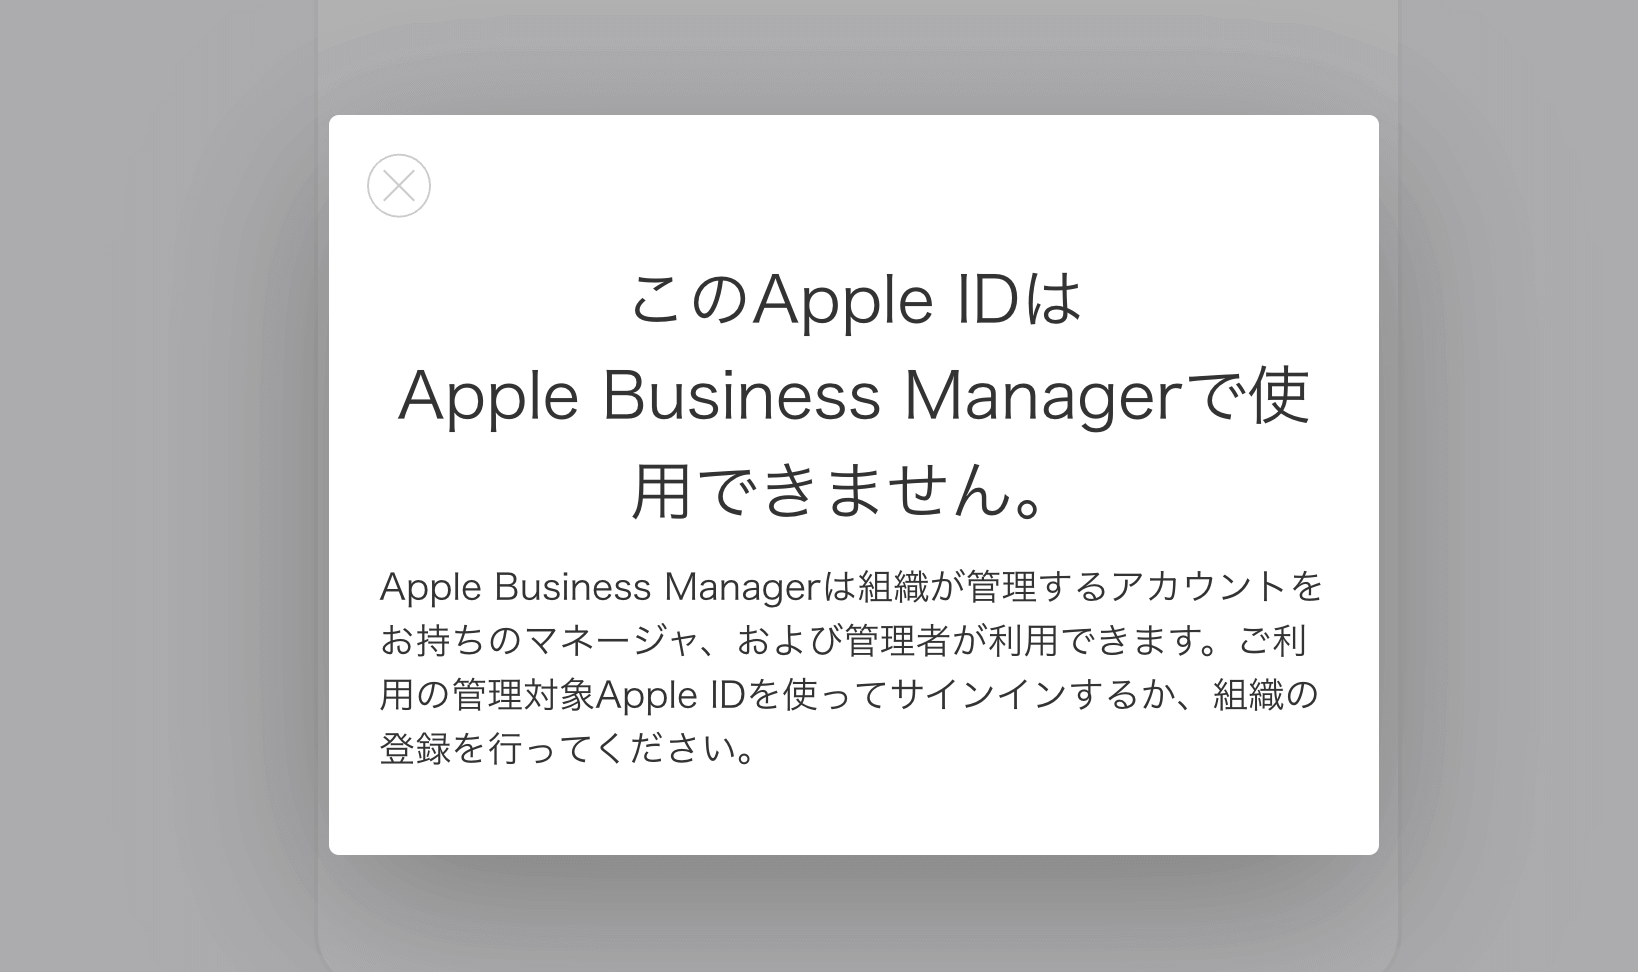 【Apple】Apple Business Manager(ABM)とは？利用登録方法と必要なもの